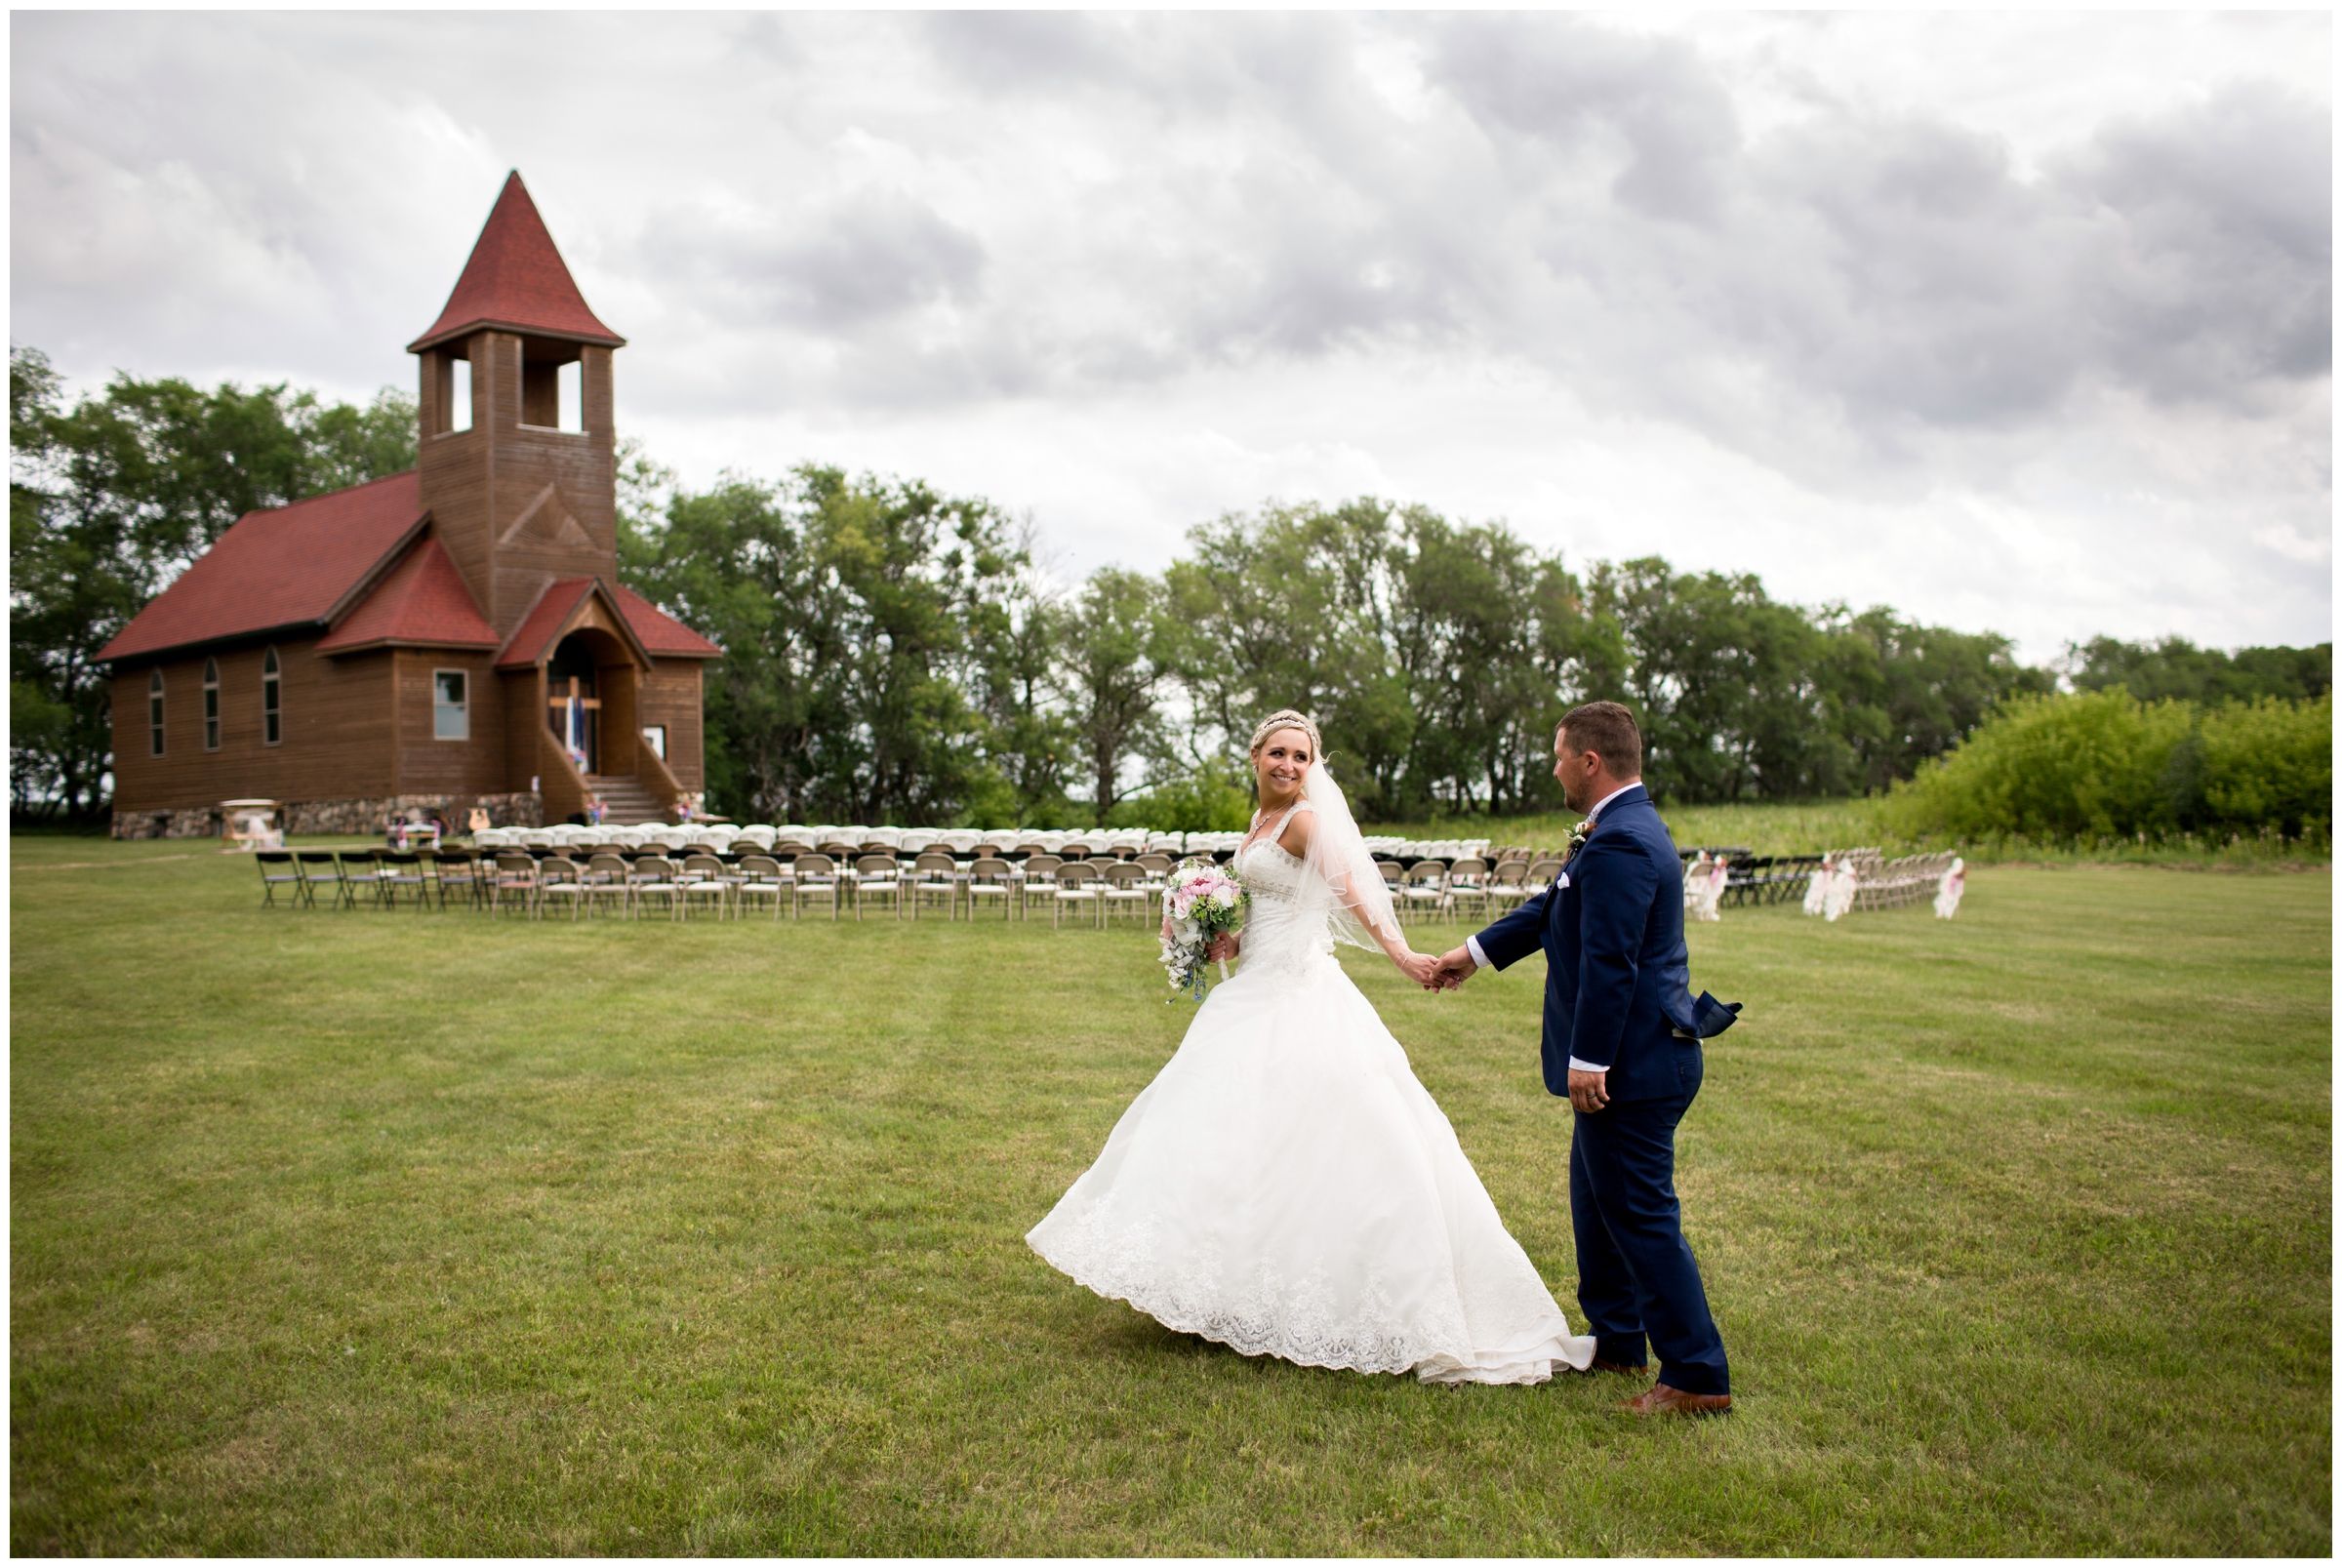 couple walking with chapel in background during rustic country wedding 